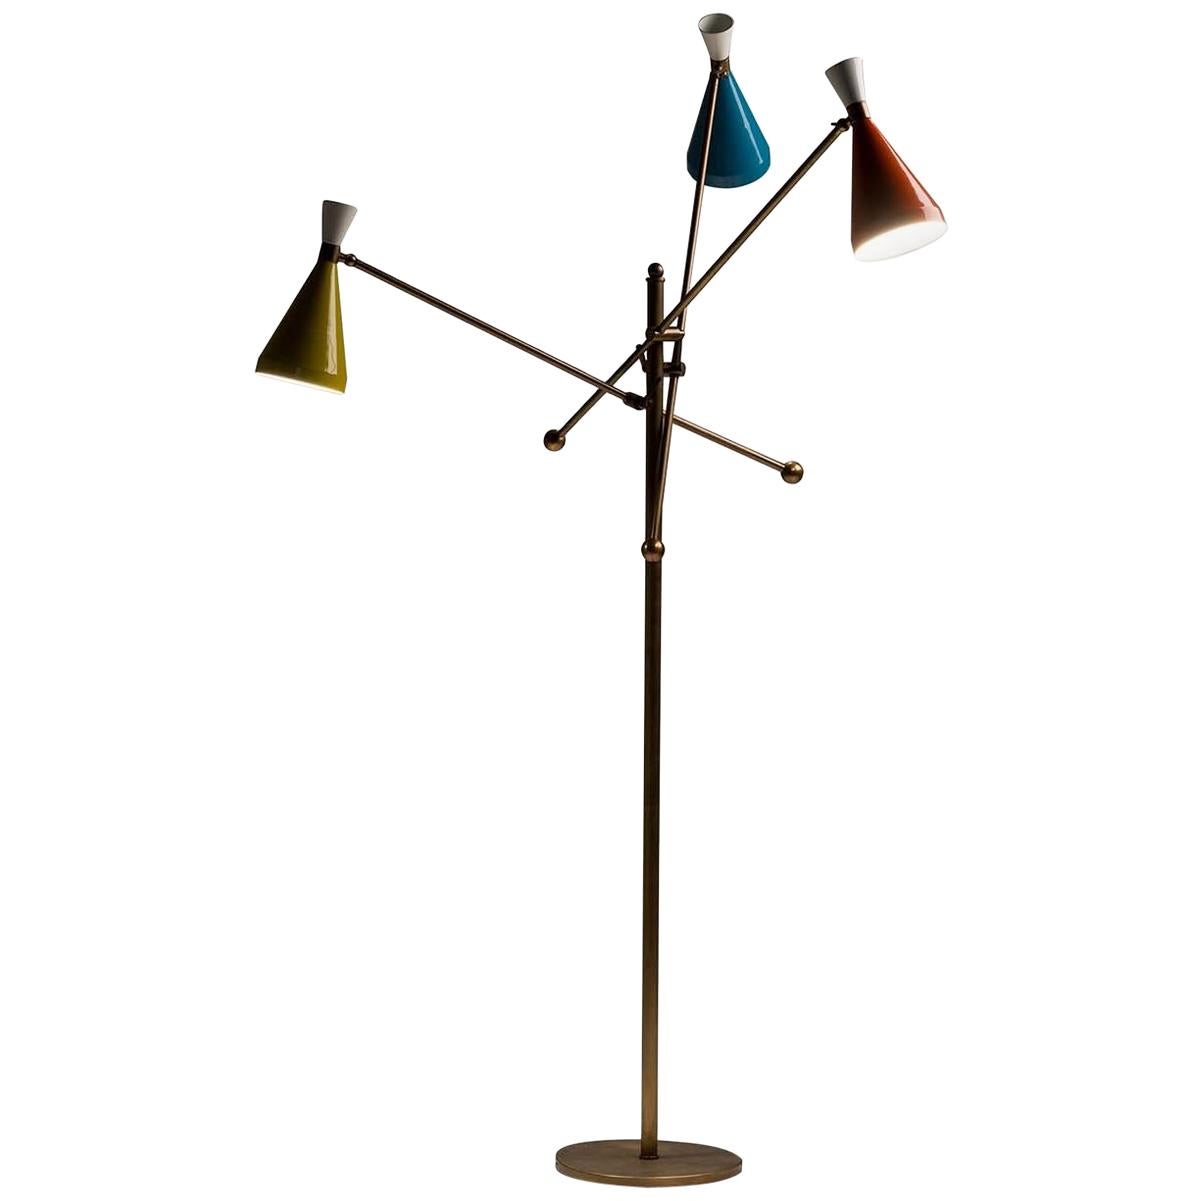 Flipper Floor Lamp by Marco and Giulio Mantellassi